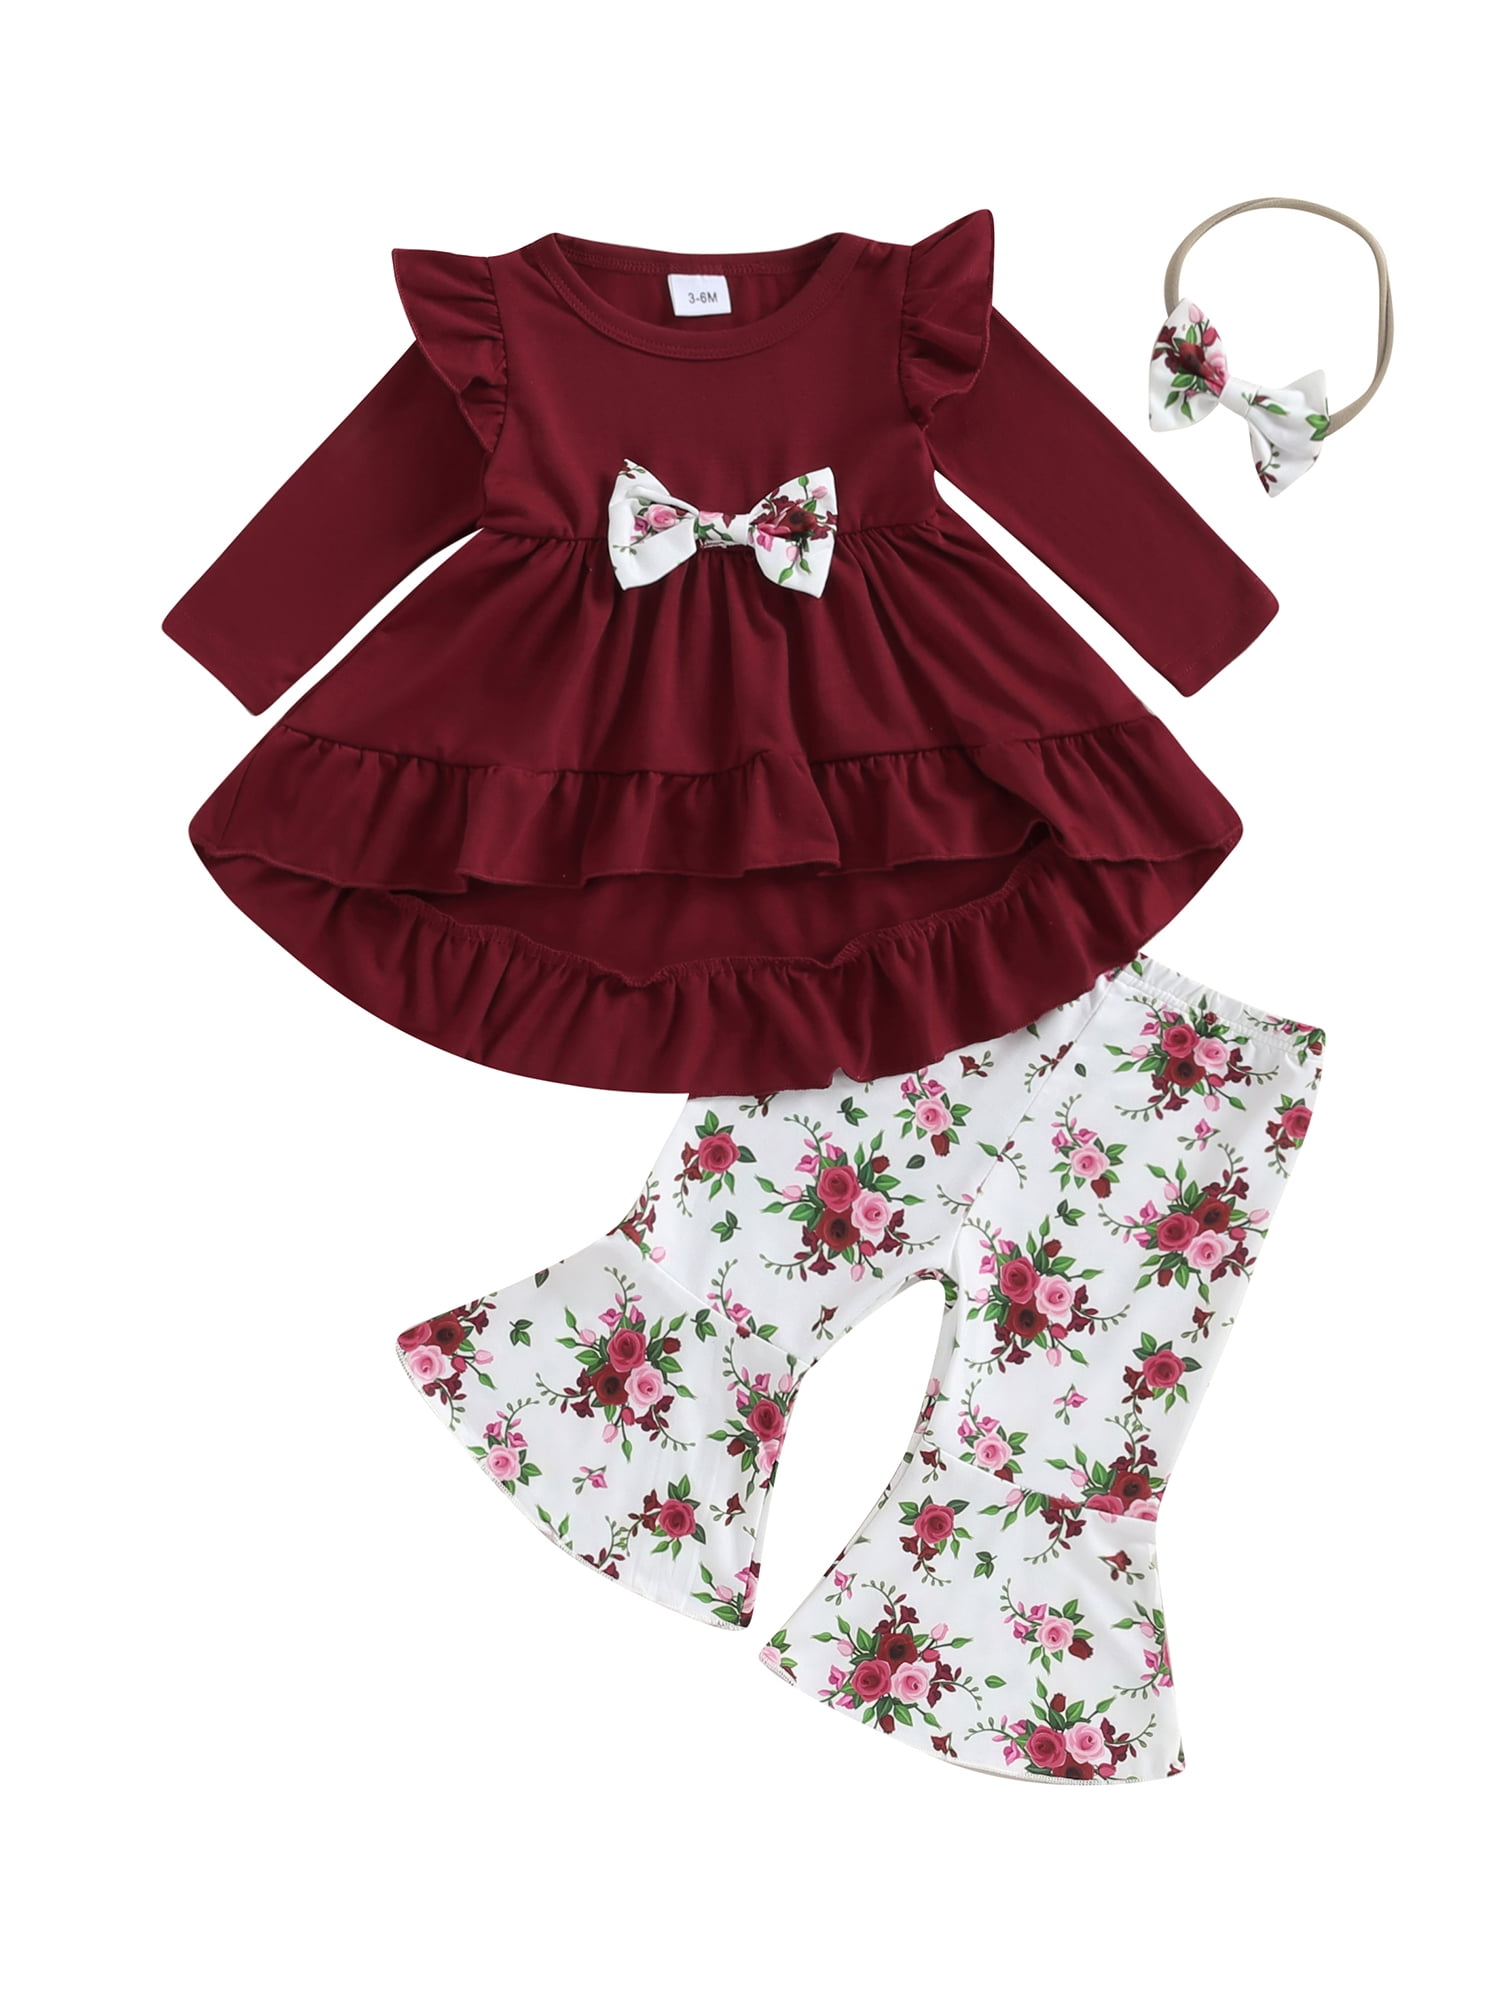 Toddler Baby Girl Fall Clothes Bowknot Ruffle Tunic Dress Tops Floral ...